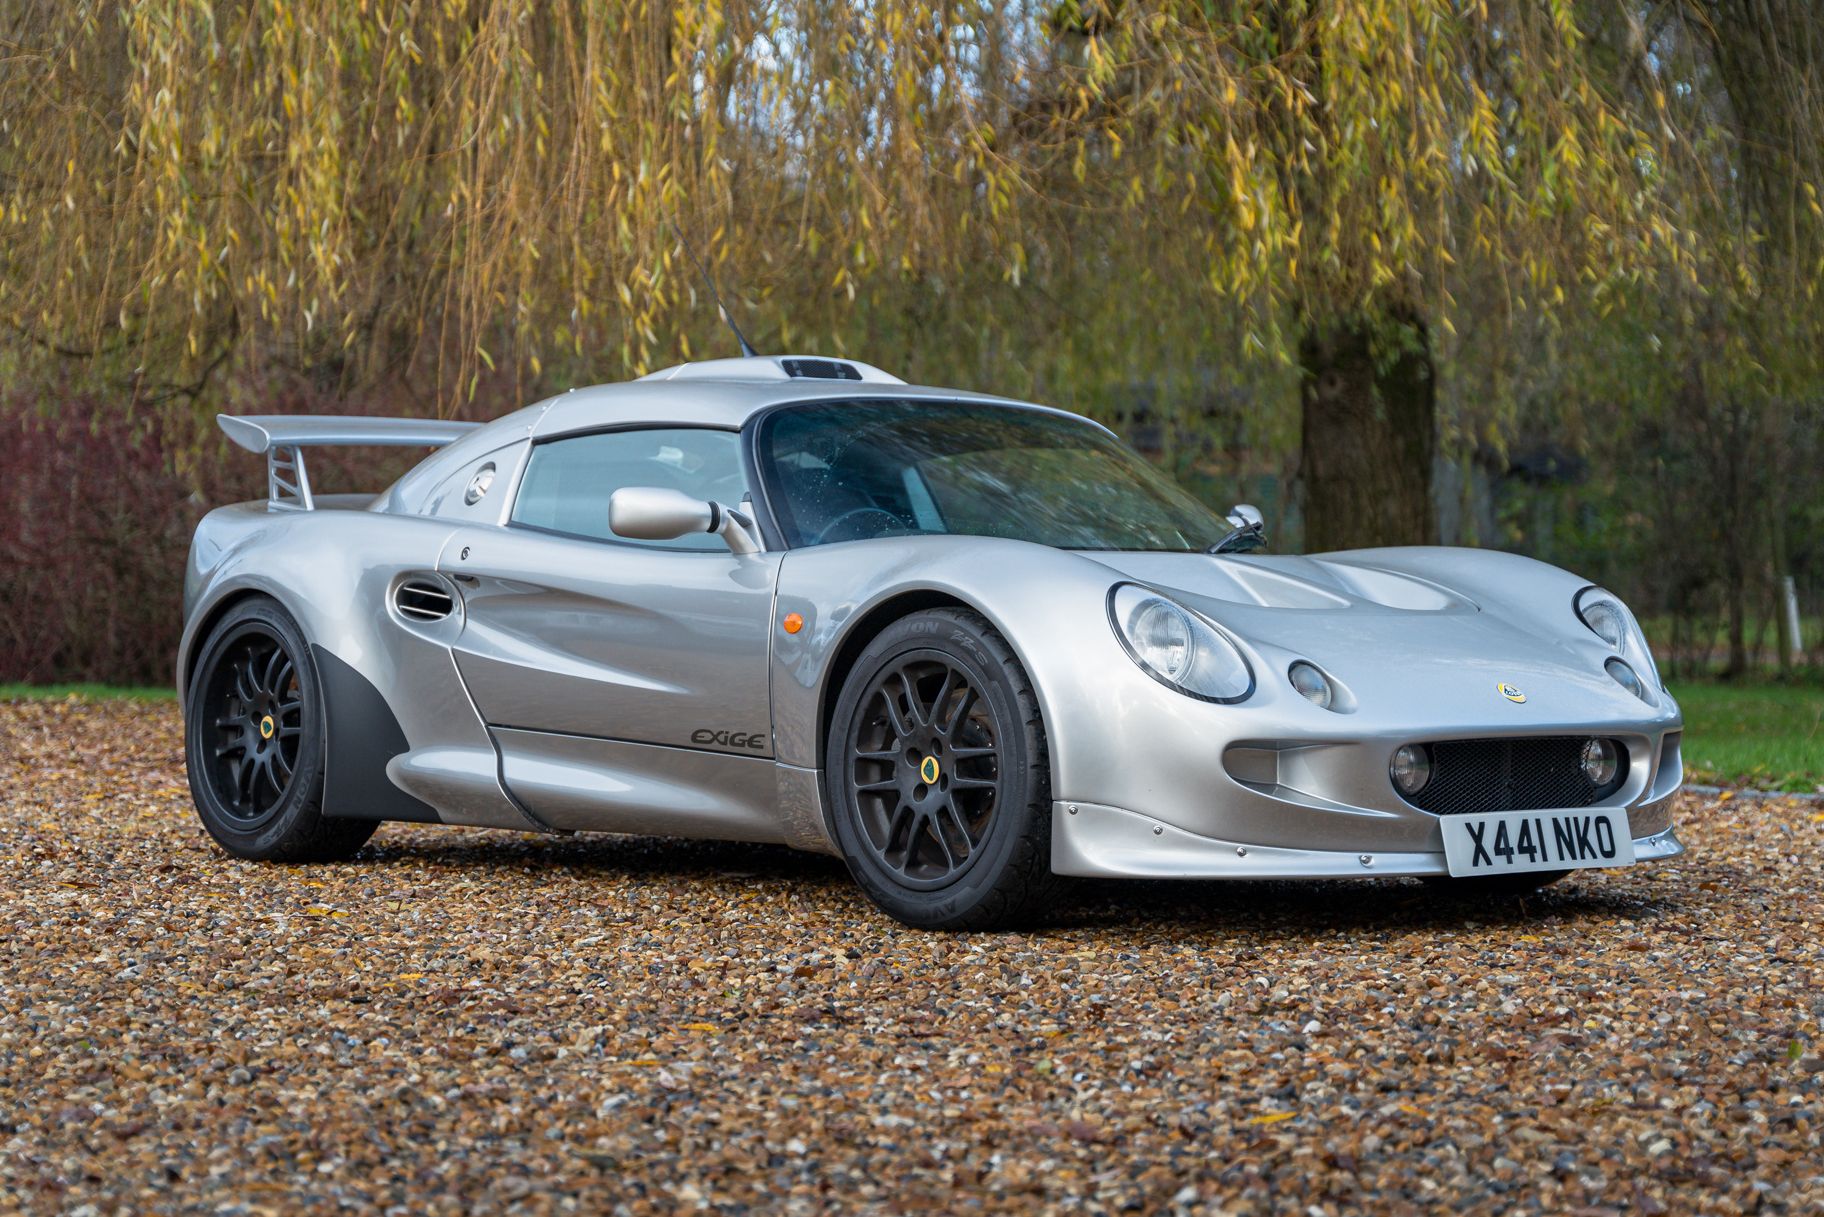 Silver Lotus Exige S1 sports car parked